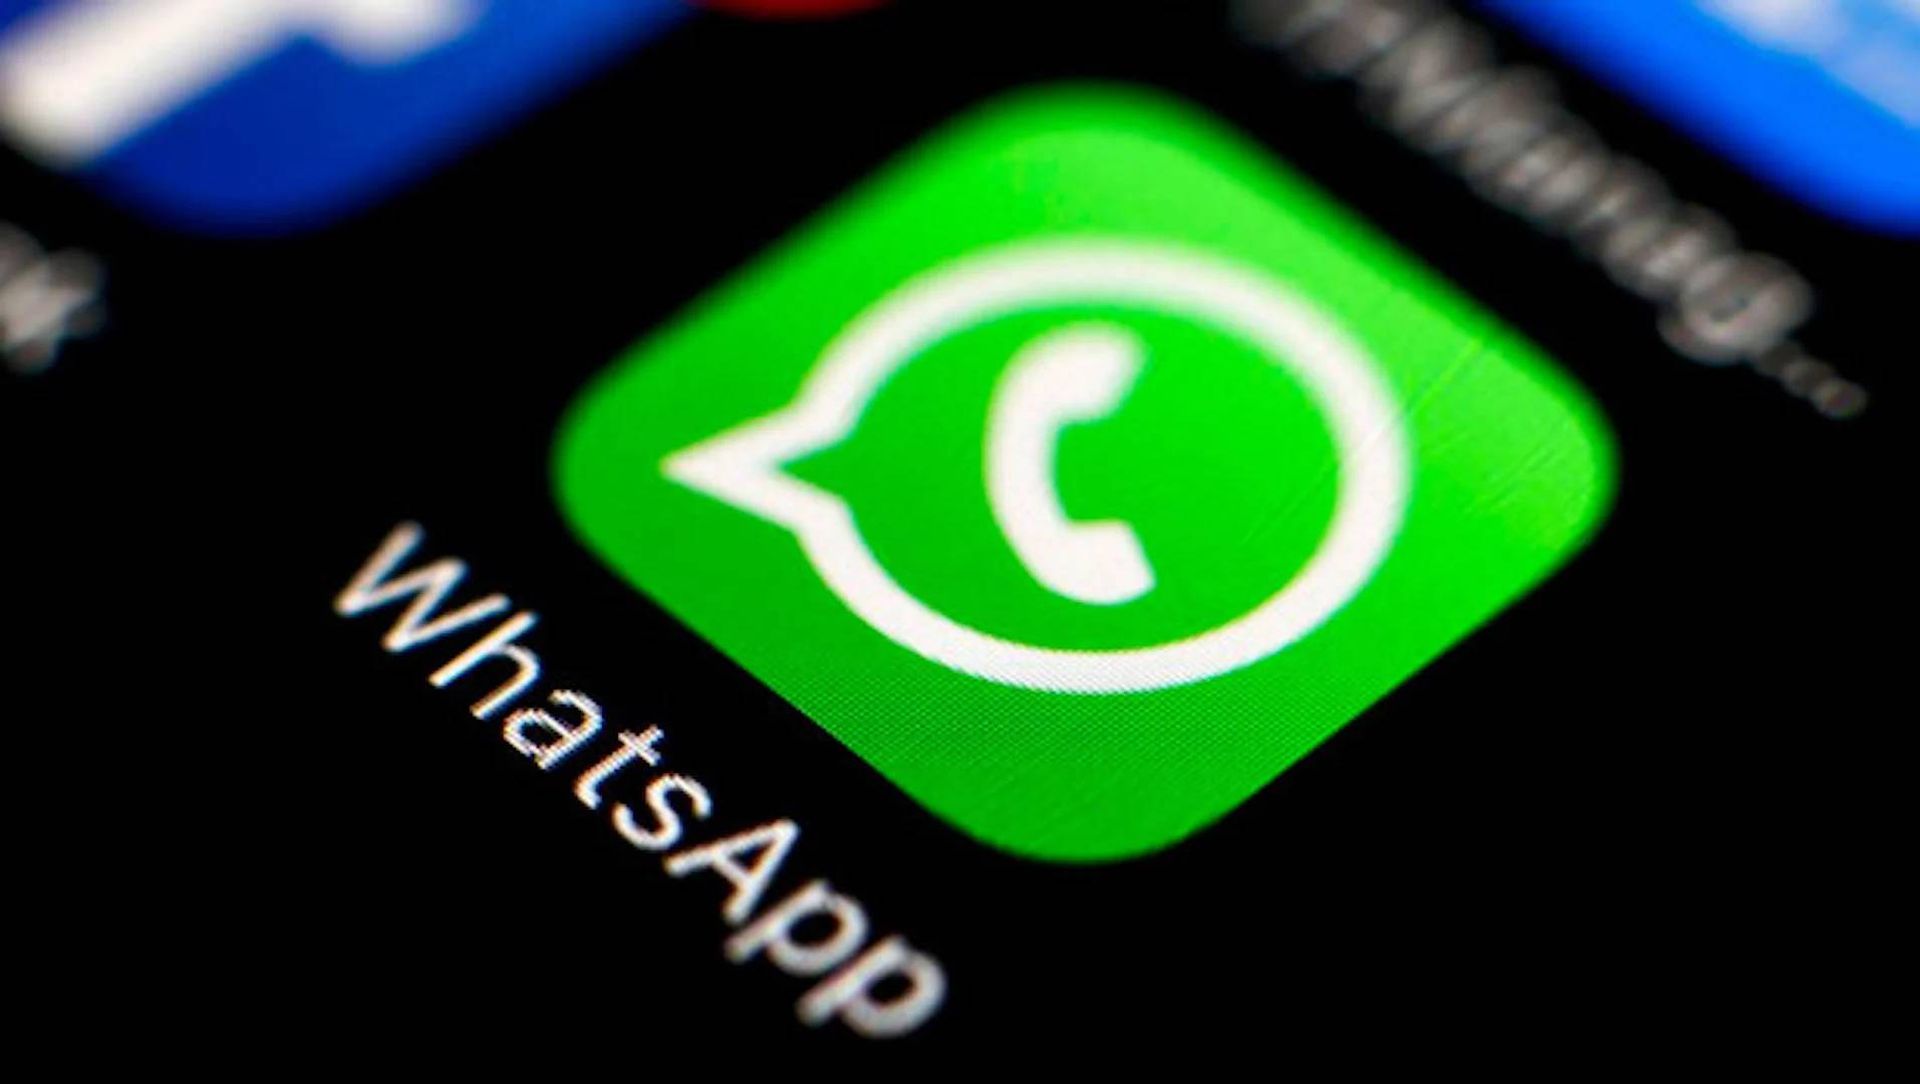 WhatsApp not connecting iPhone- How to fix it?